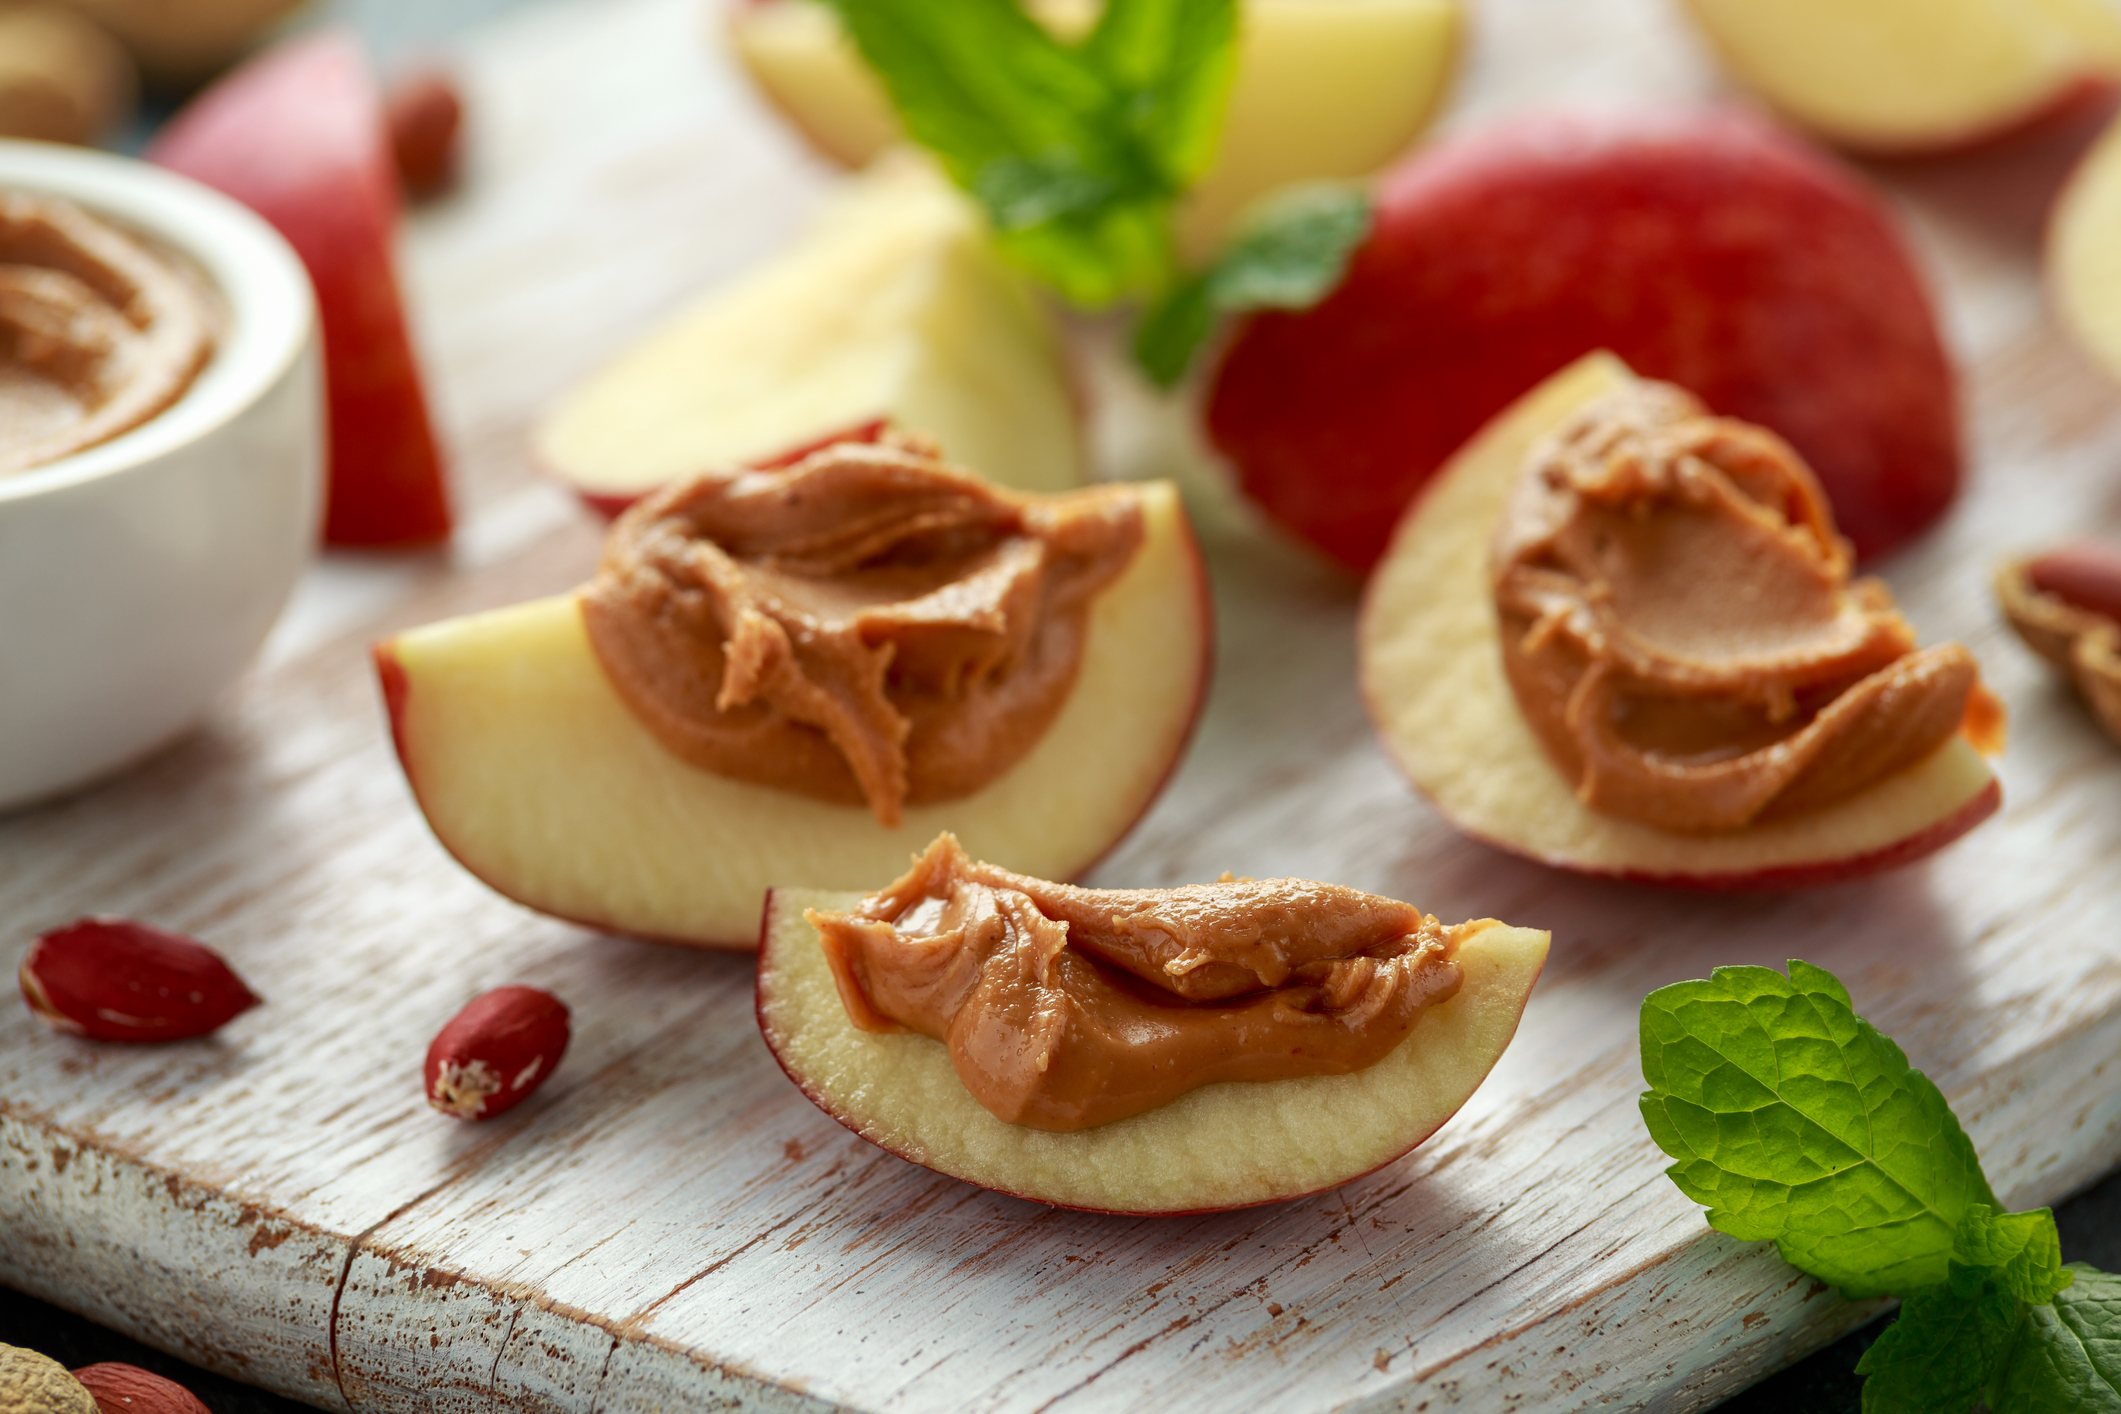 Benefits of Peanut Butter Explained and Dietitians on Ways to Eat It